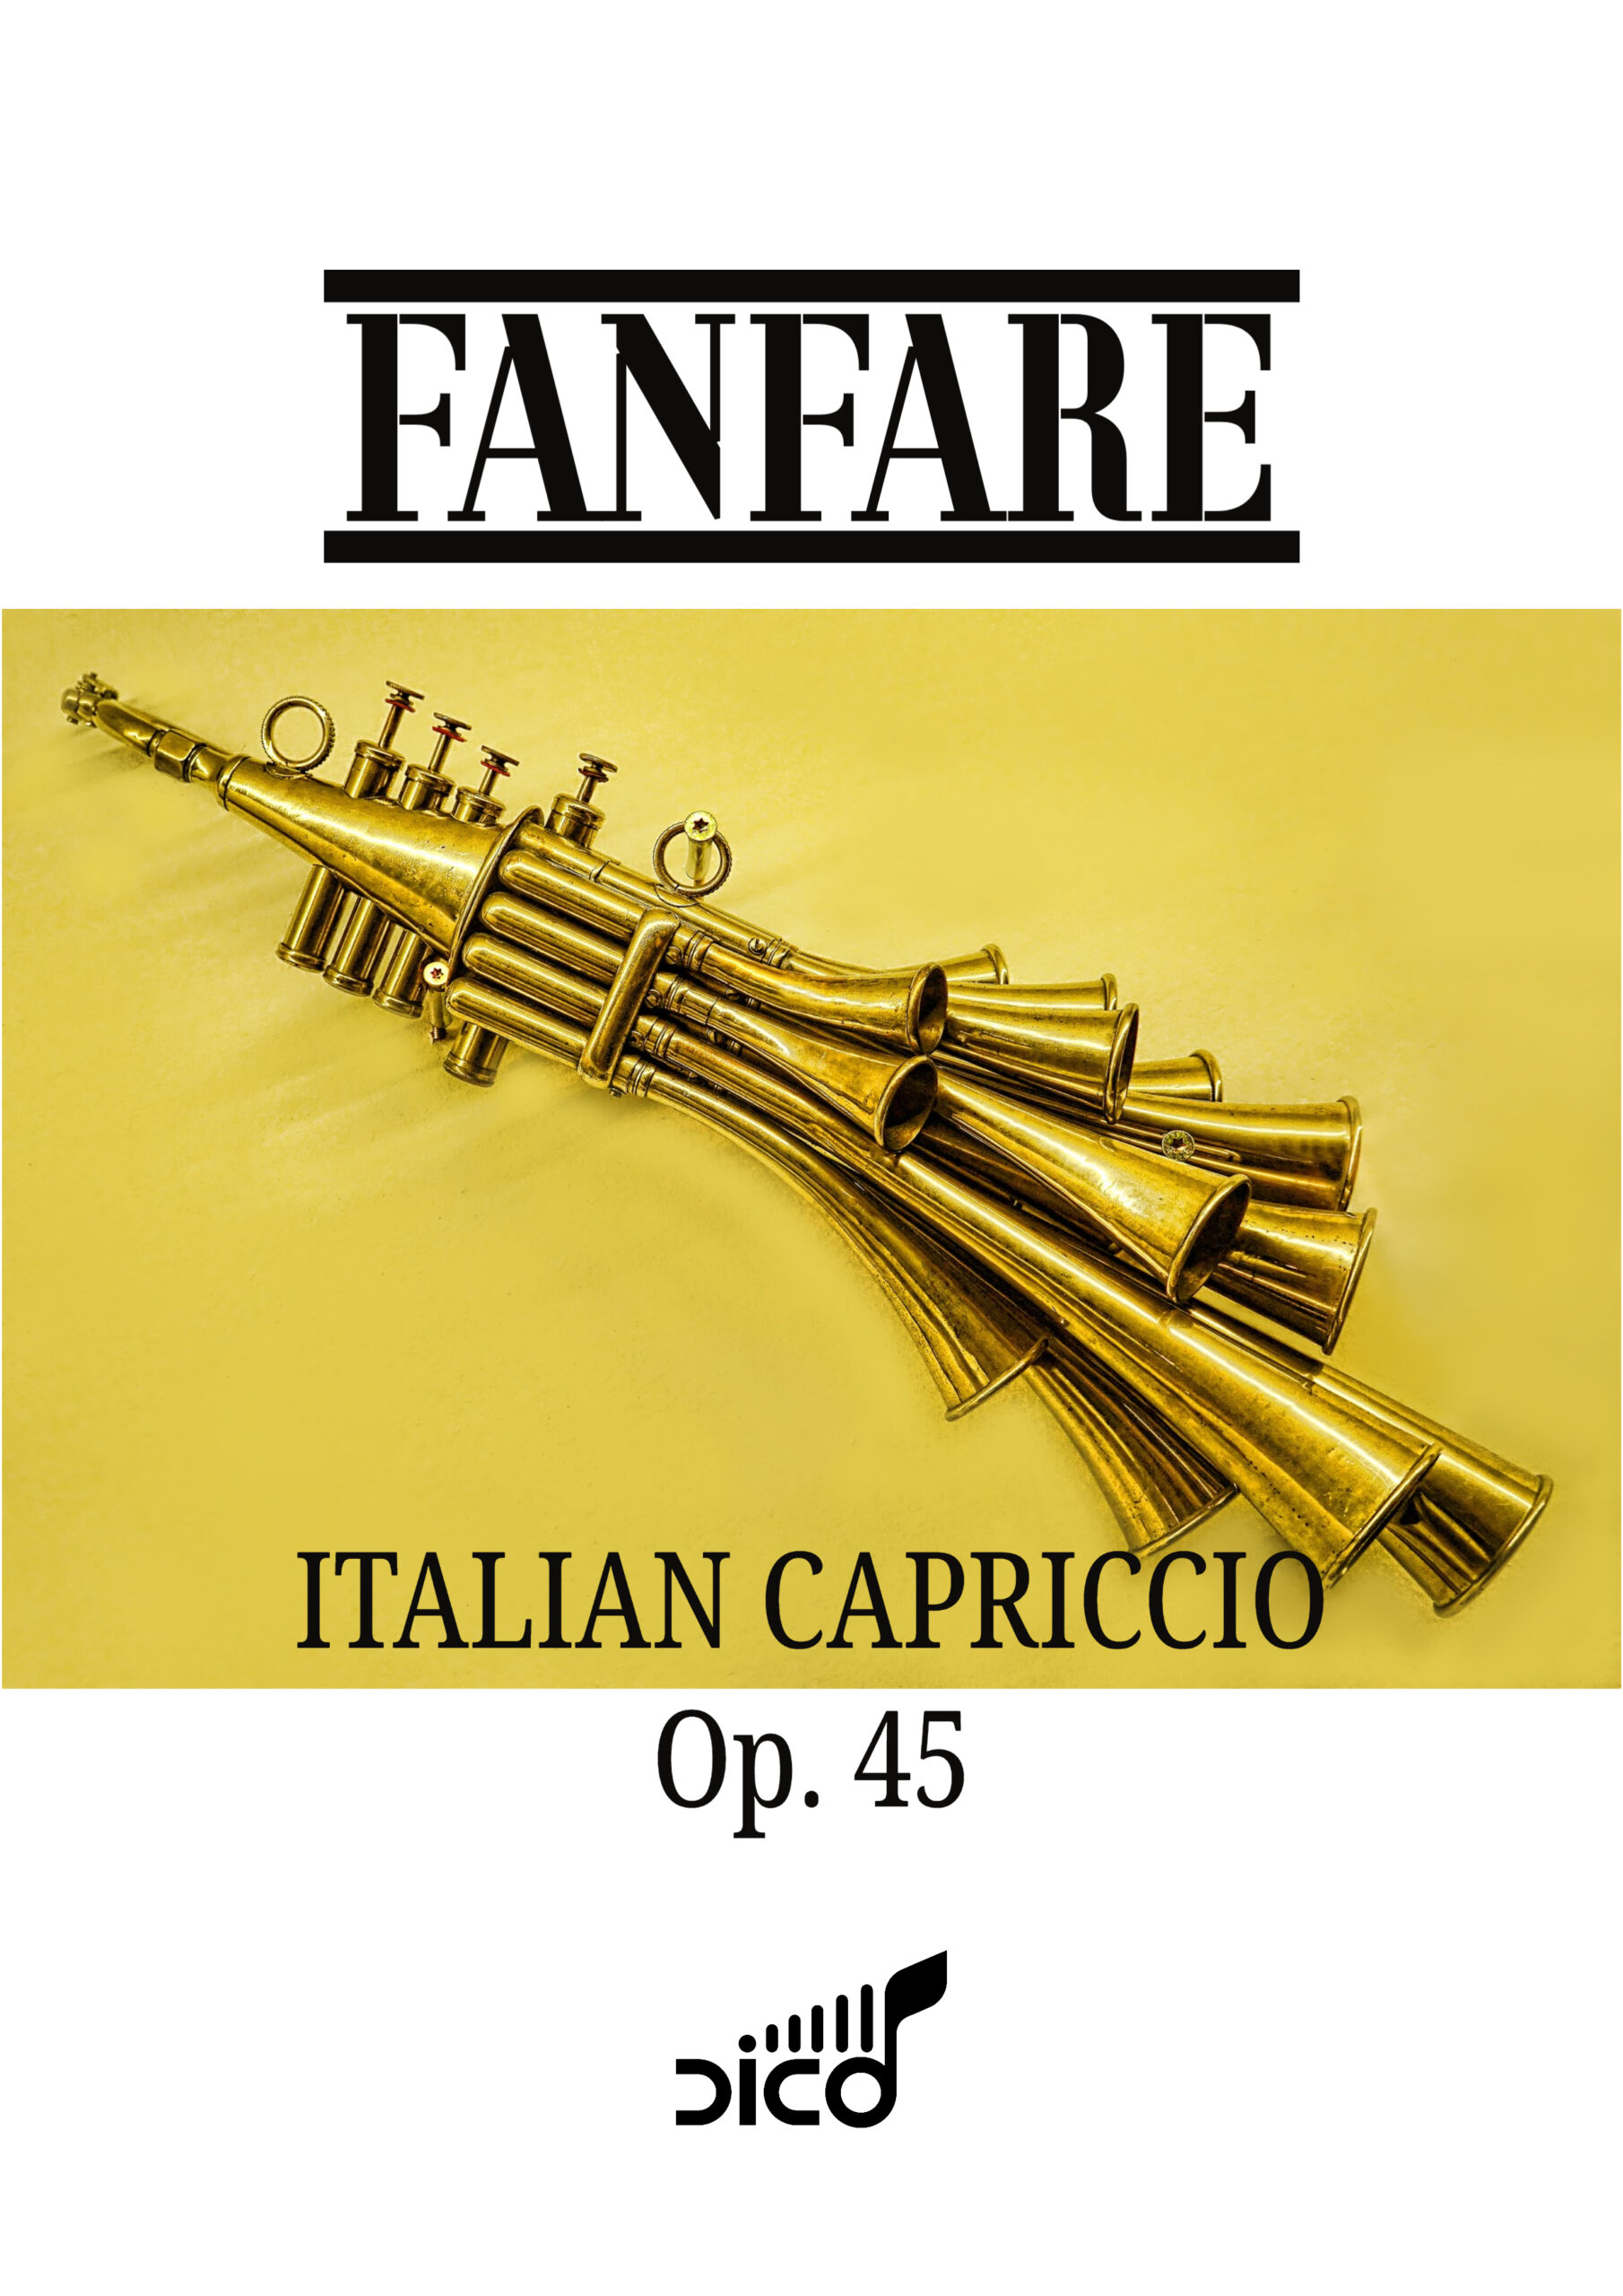 Wedding Series Fanfare web cover scaled